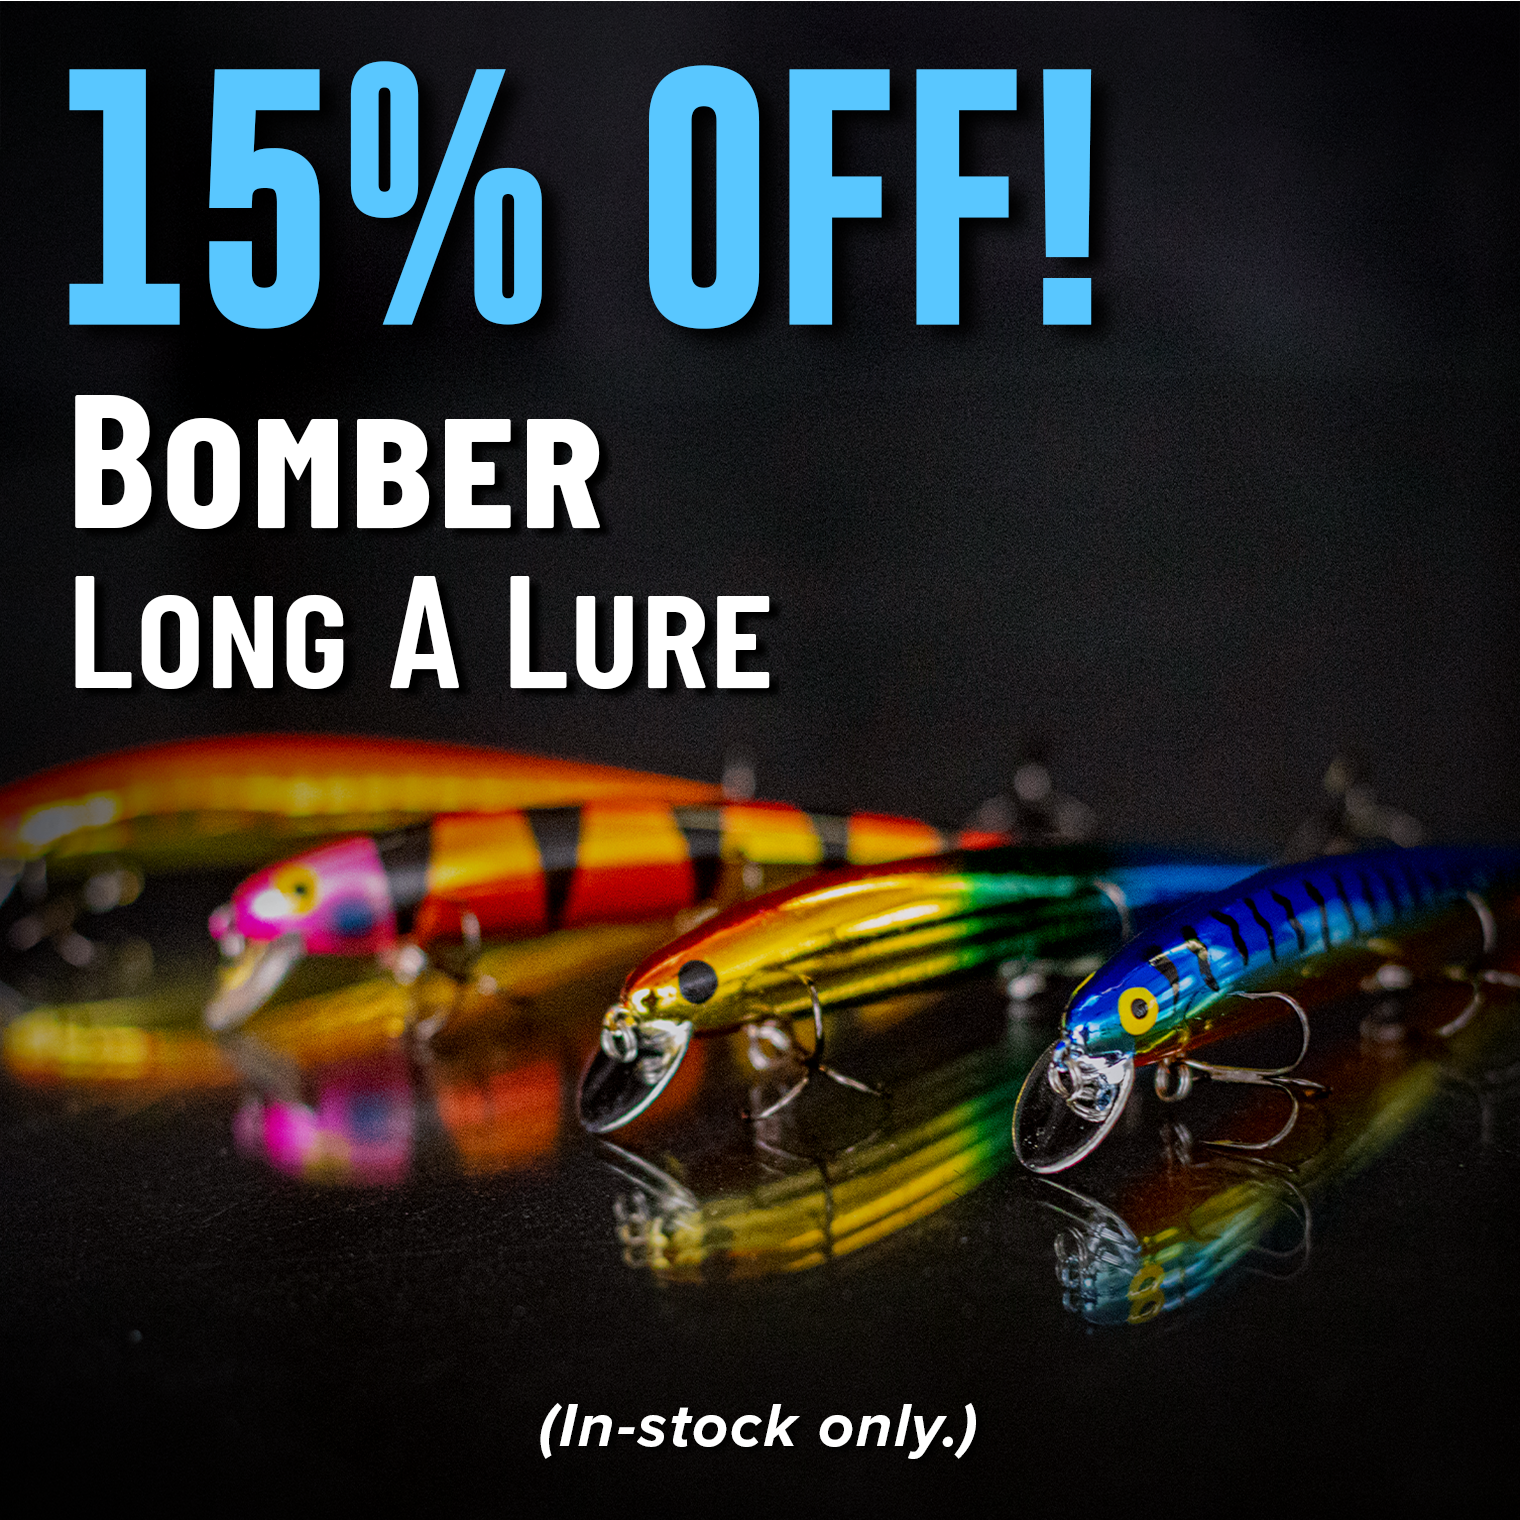 15% Off! Bomber Long A Lure (In-stock only.)